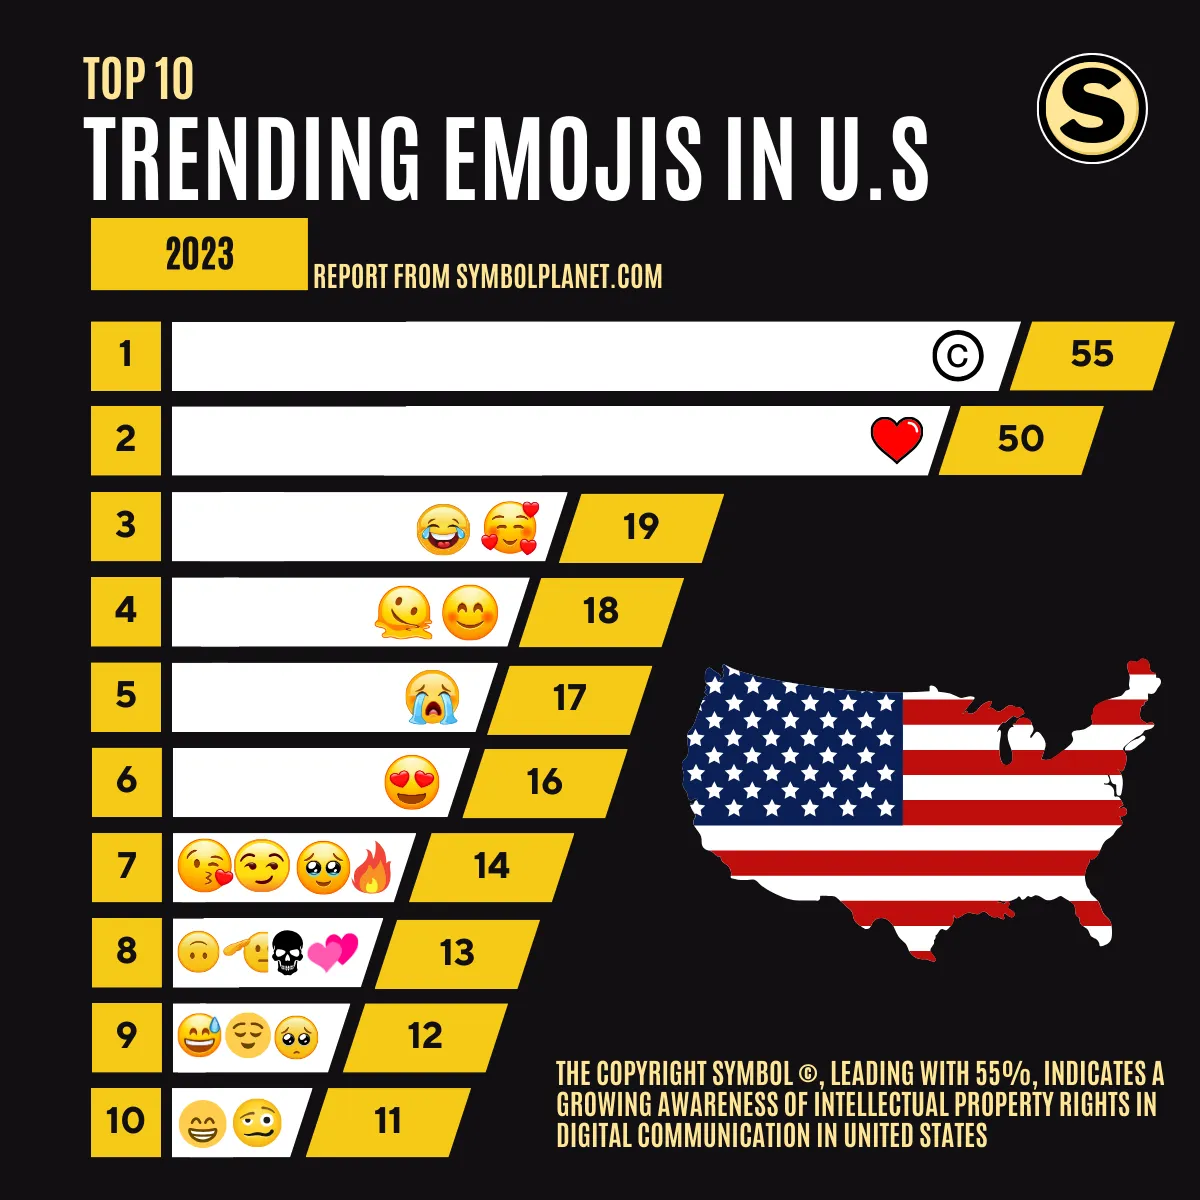 Top 10 Trending Emojis of 2023 in the United States